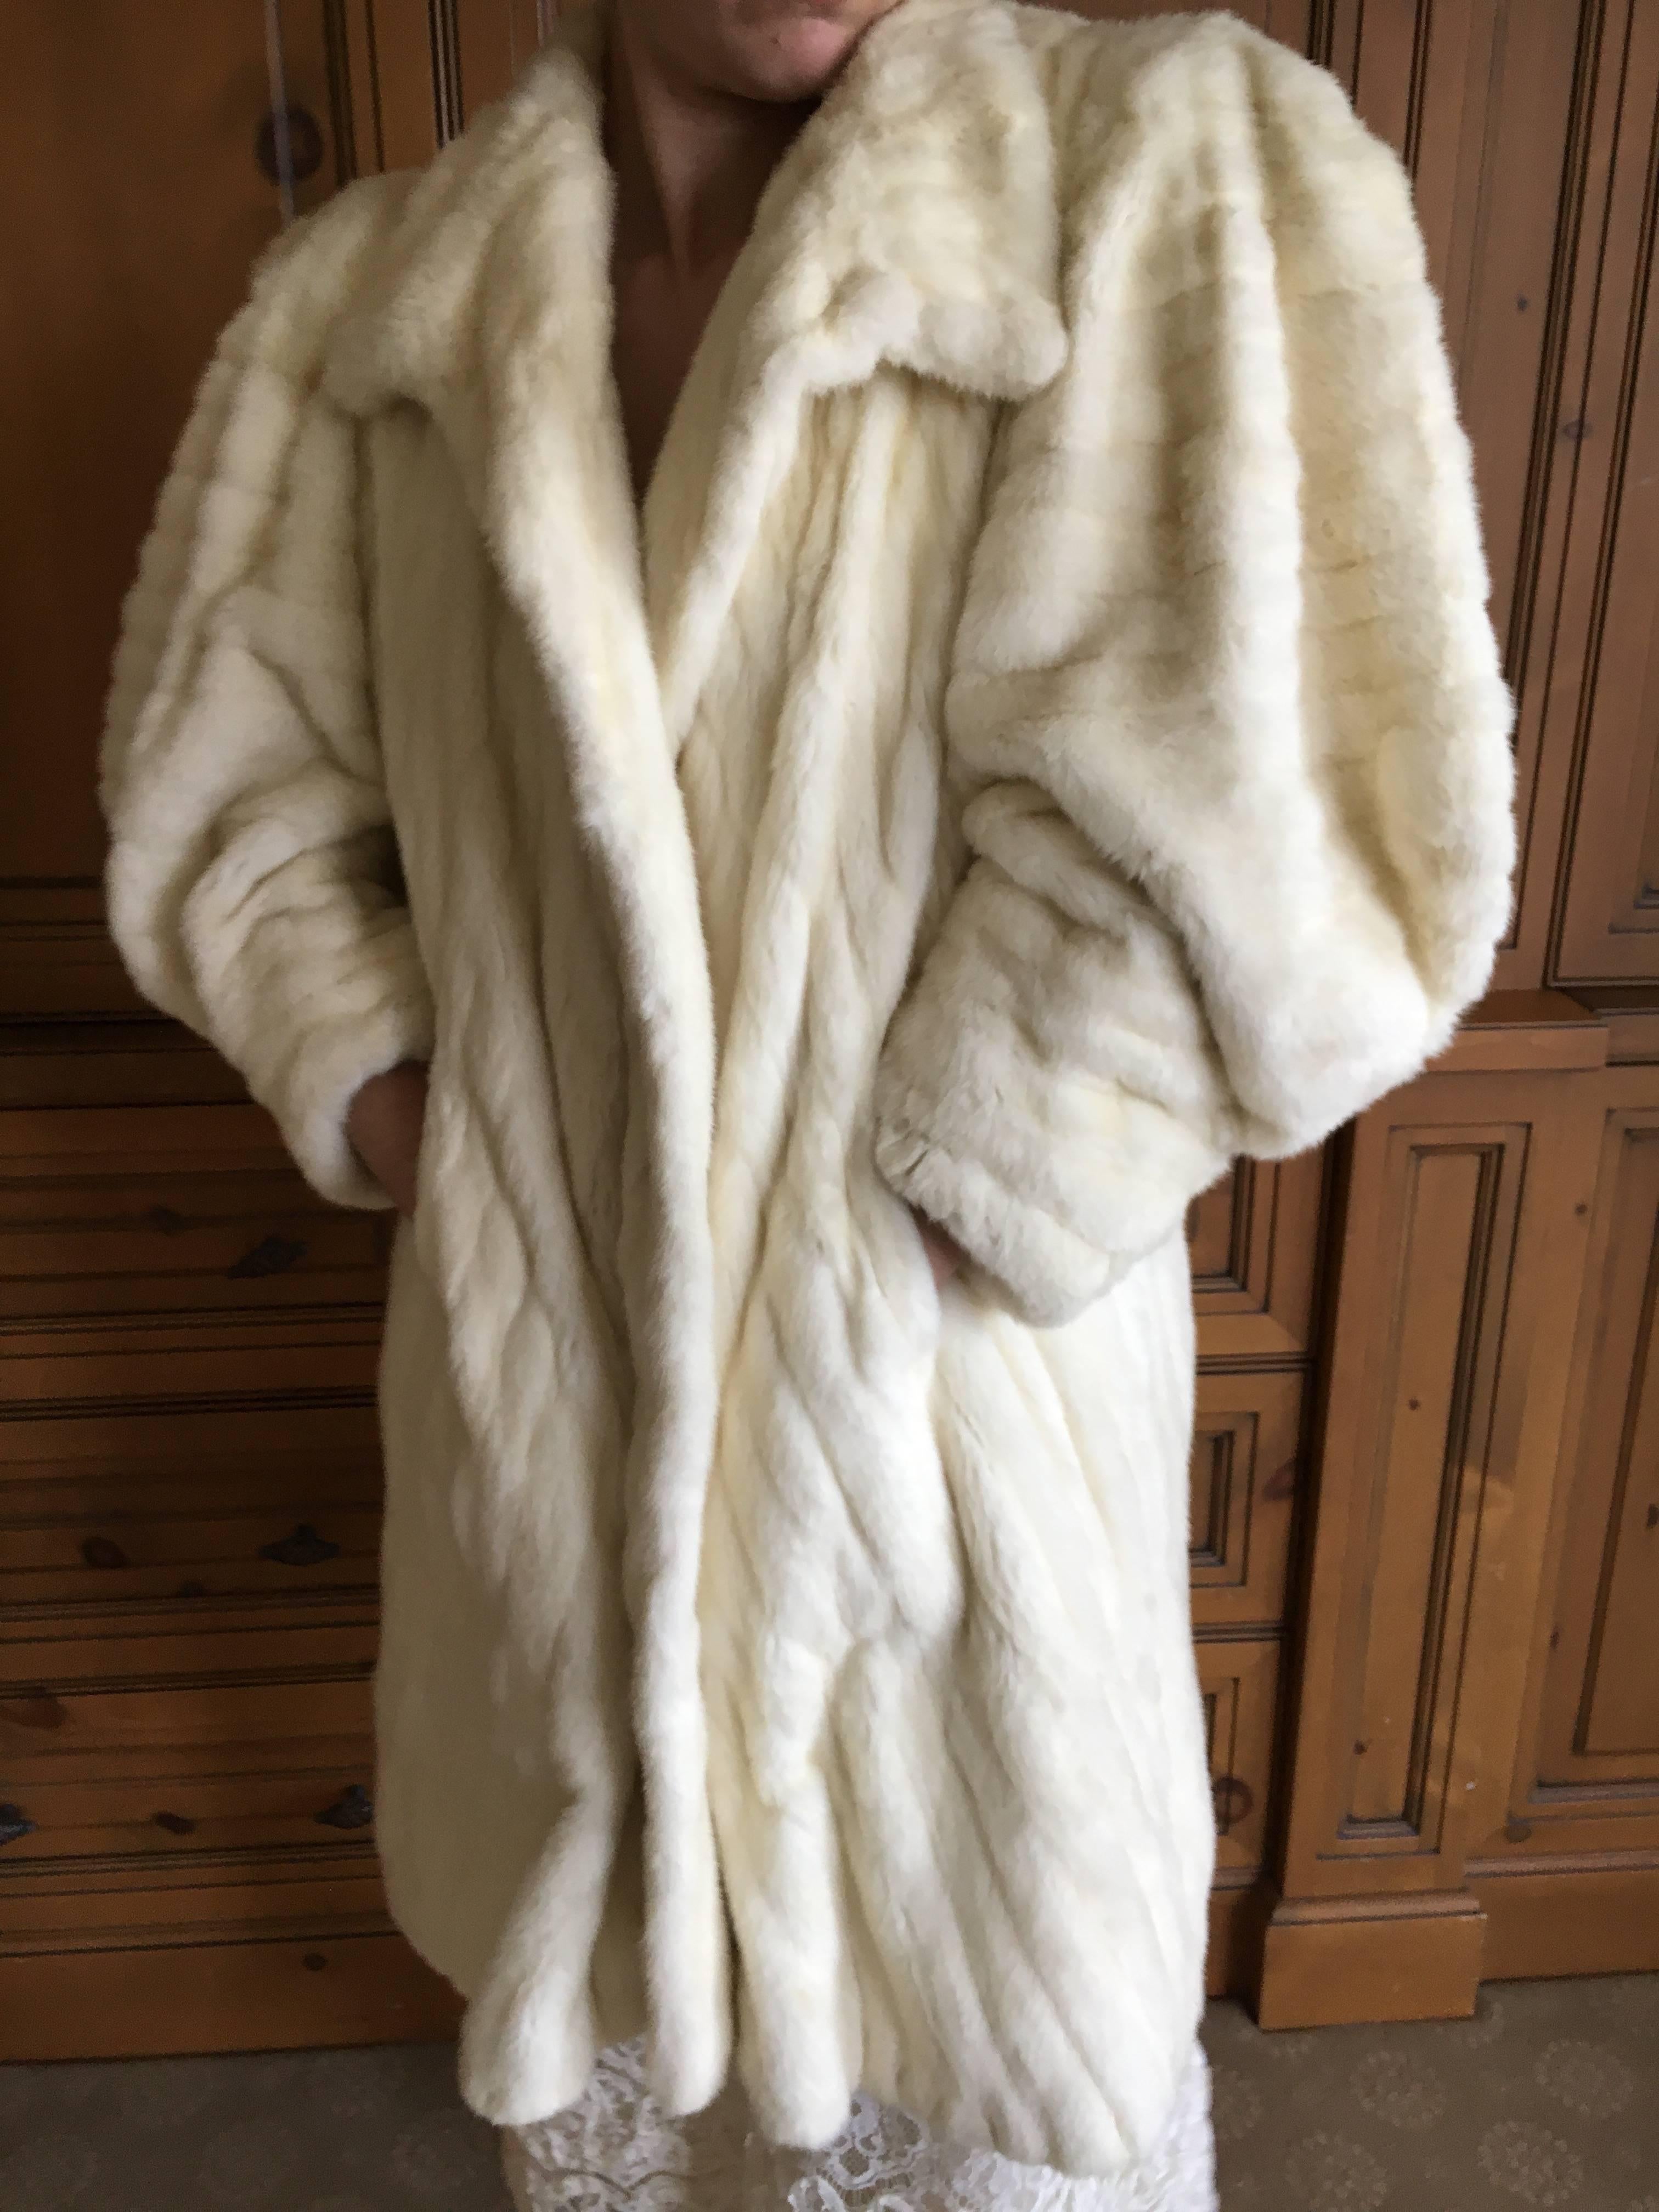 Winter White Ermine Chevron Pattern Fur Coat with Balloon Sleeve In Good Condition For Sale In Cloverdale, CA